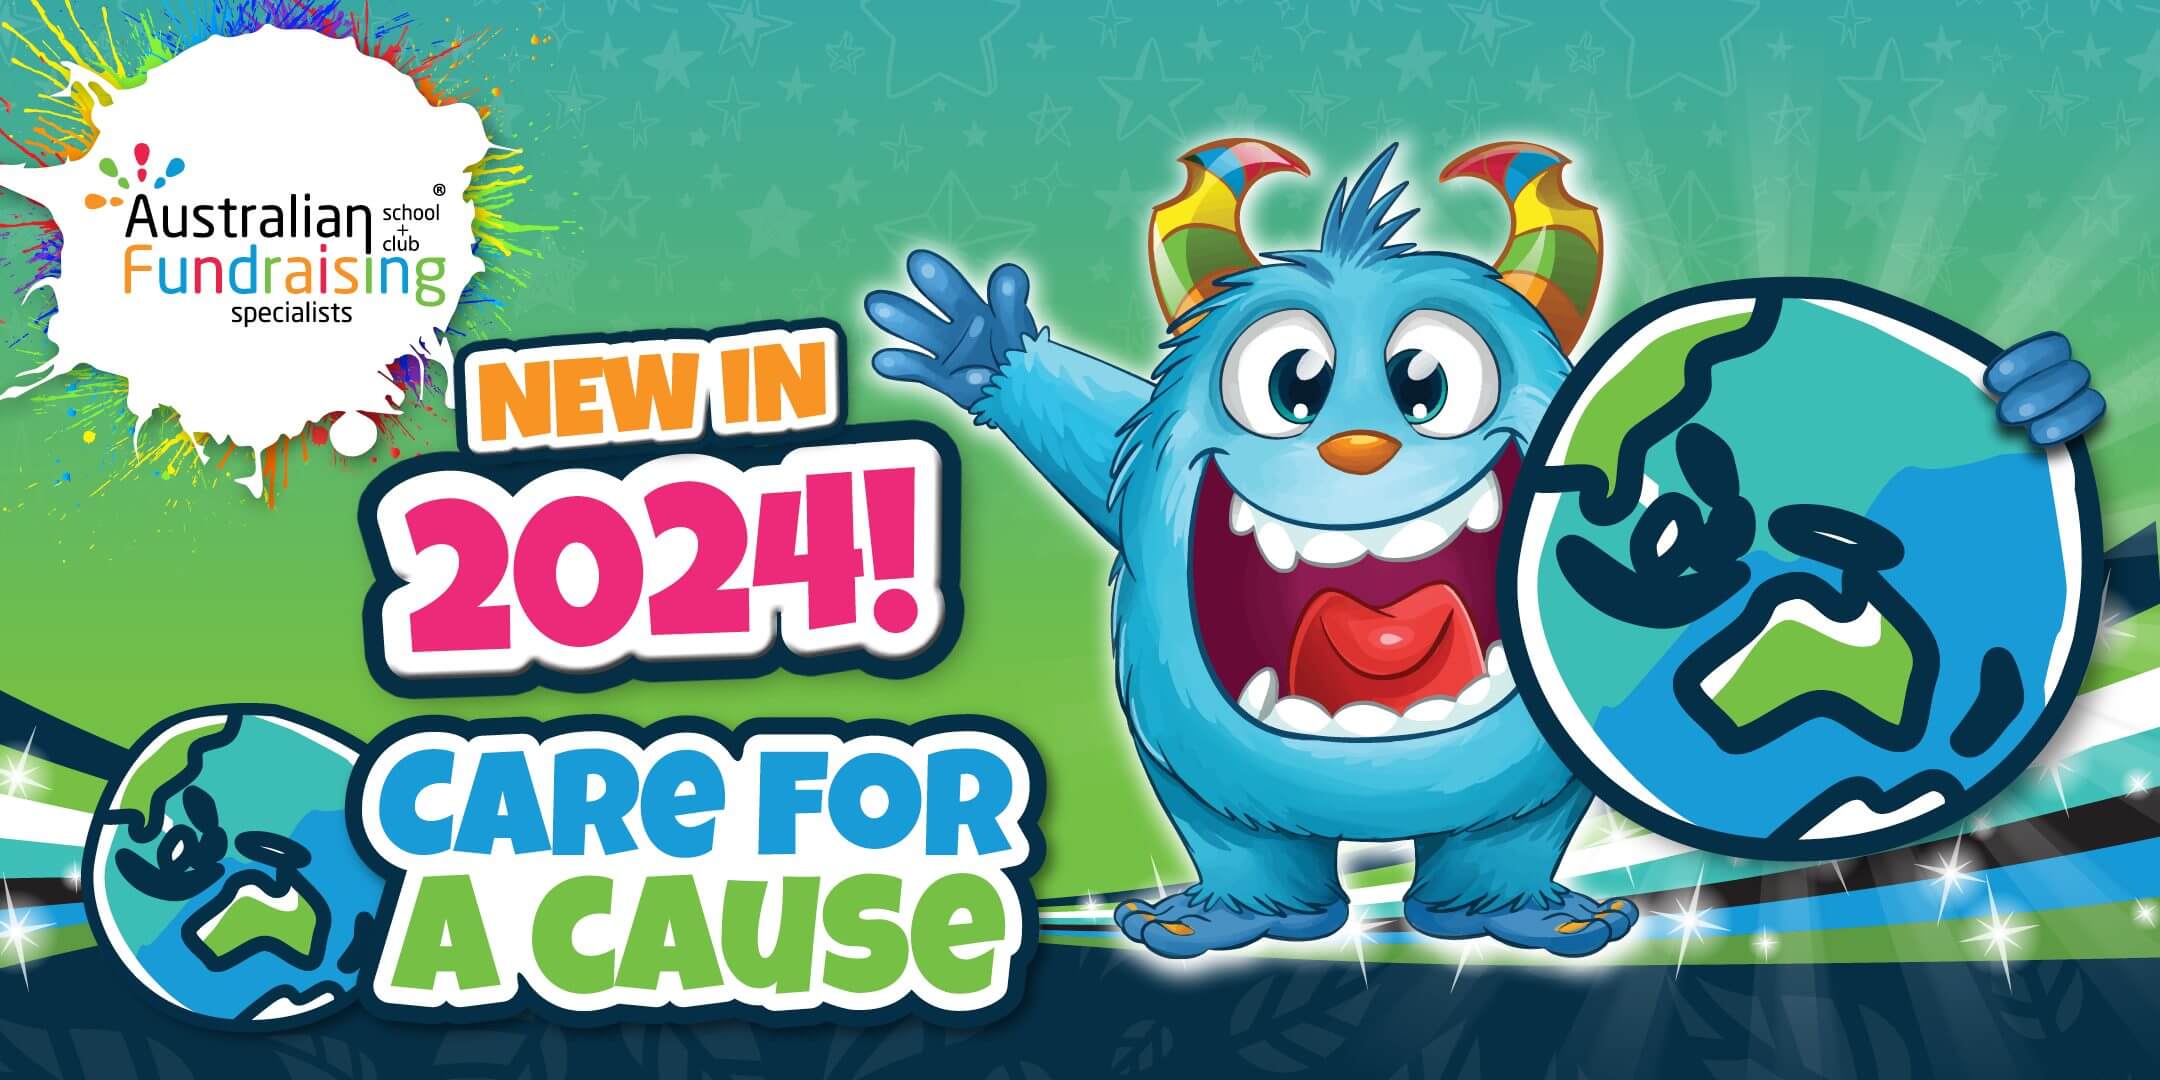 New in 2024 Care for a Cause promotional banner image.